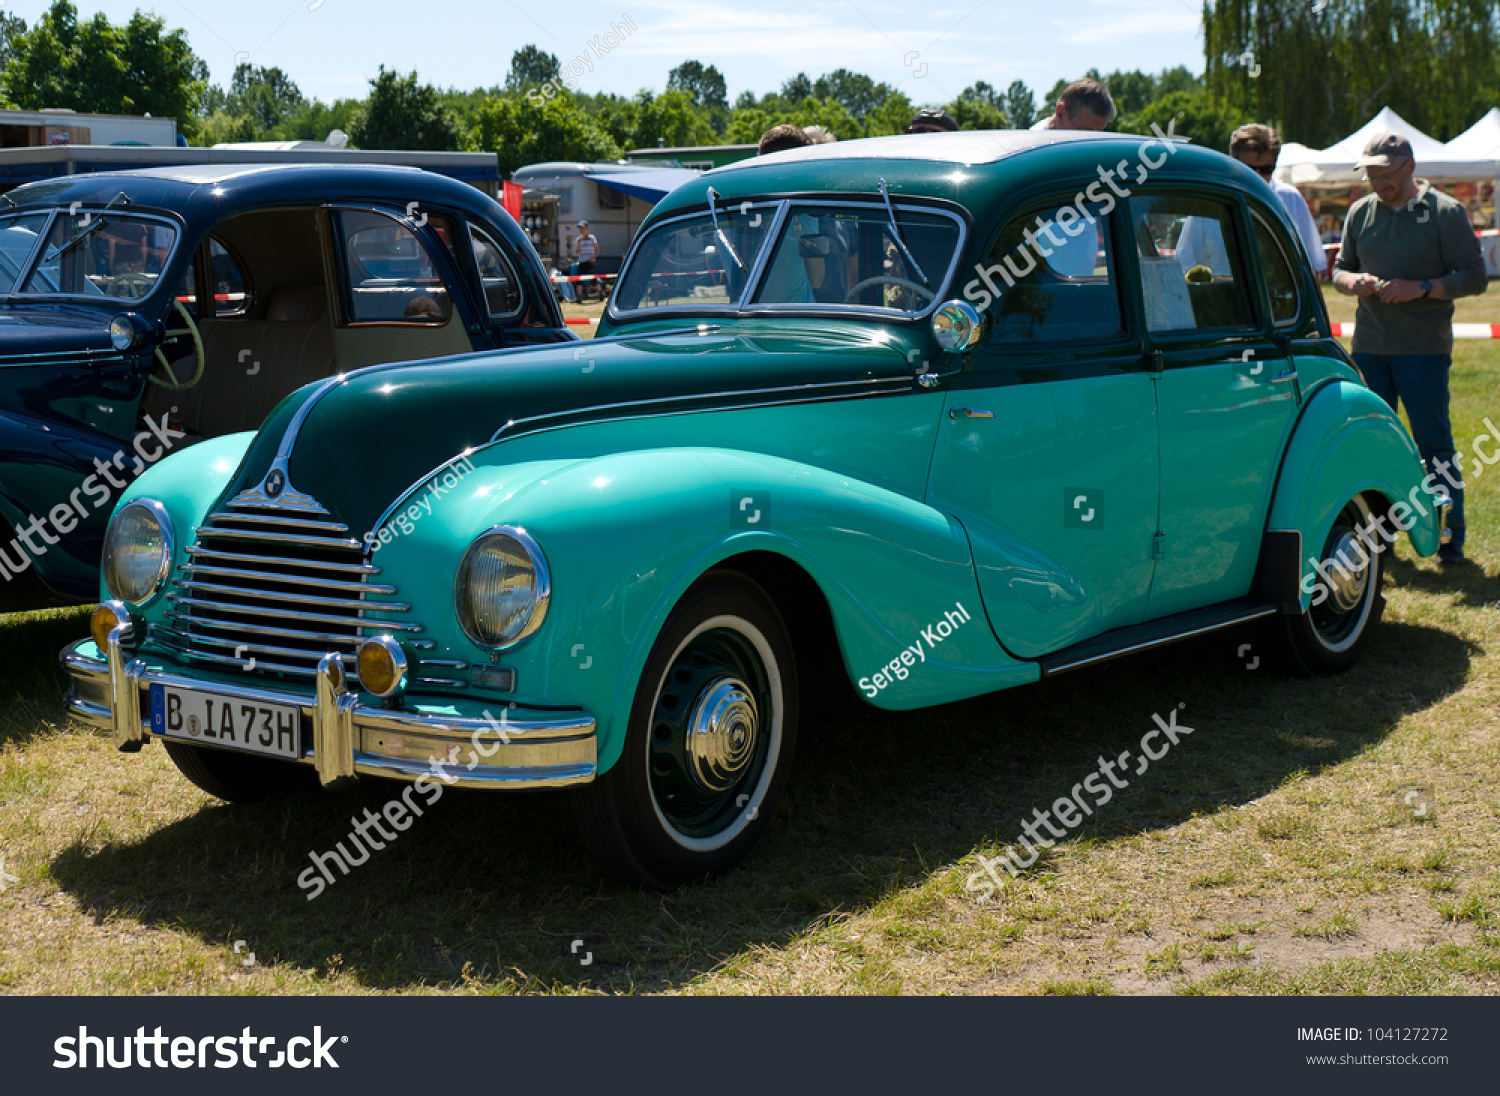 Paaren Im Glien, Germany - May 26: Car Bmw / Emw 340, "The Oldtimer Show" In Mafz, May 26, 2012 ...